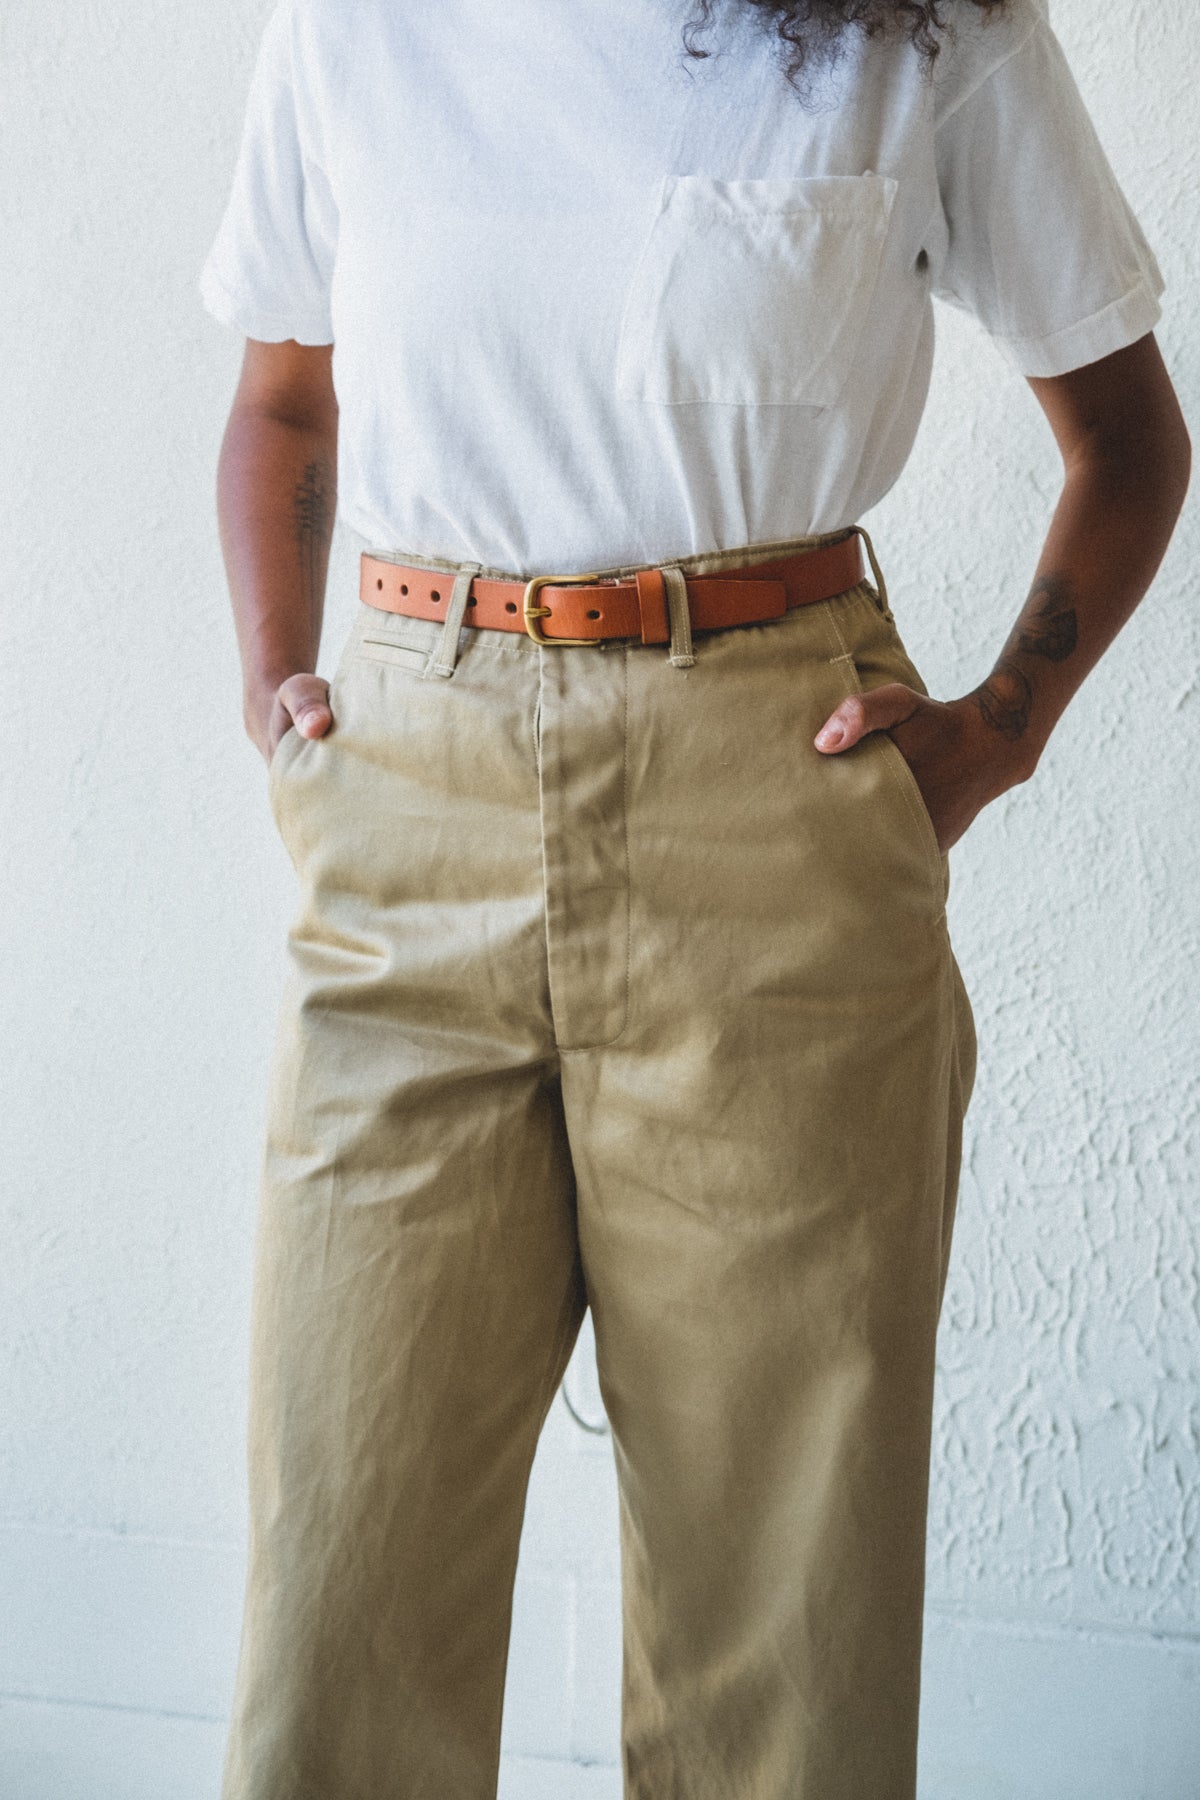 ARMY FIT TROUSER IN KHAKI